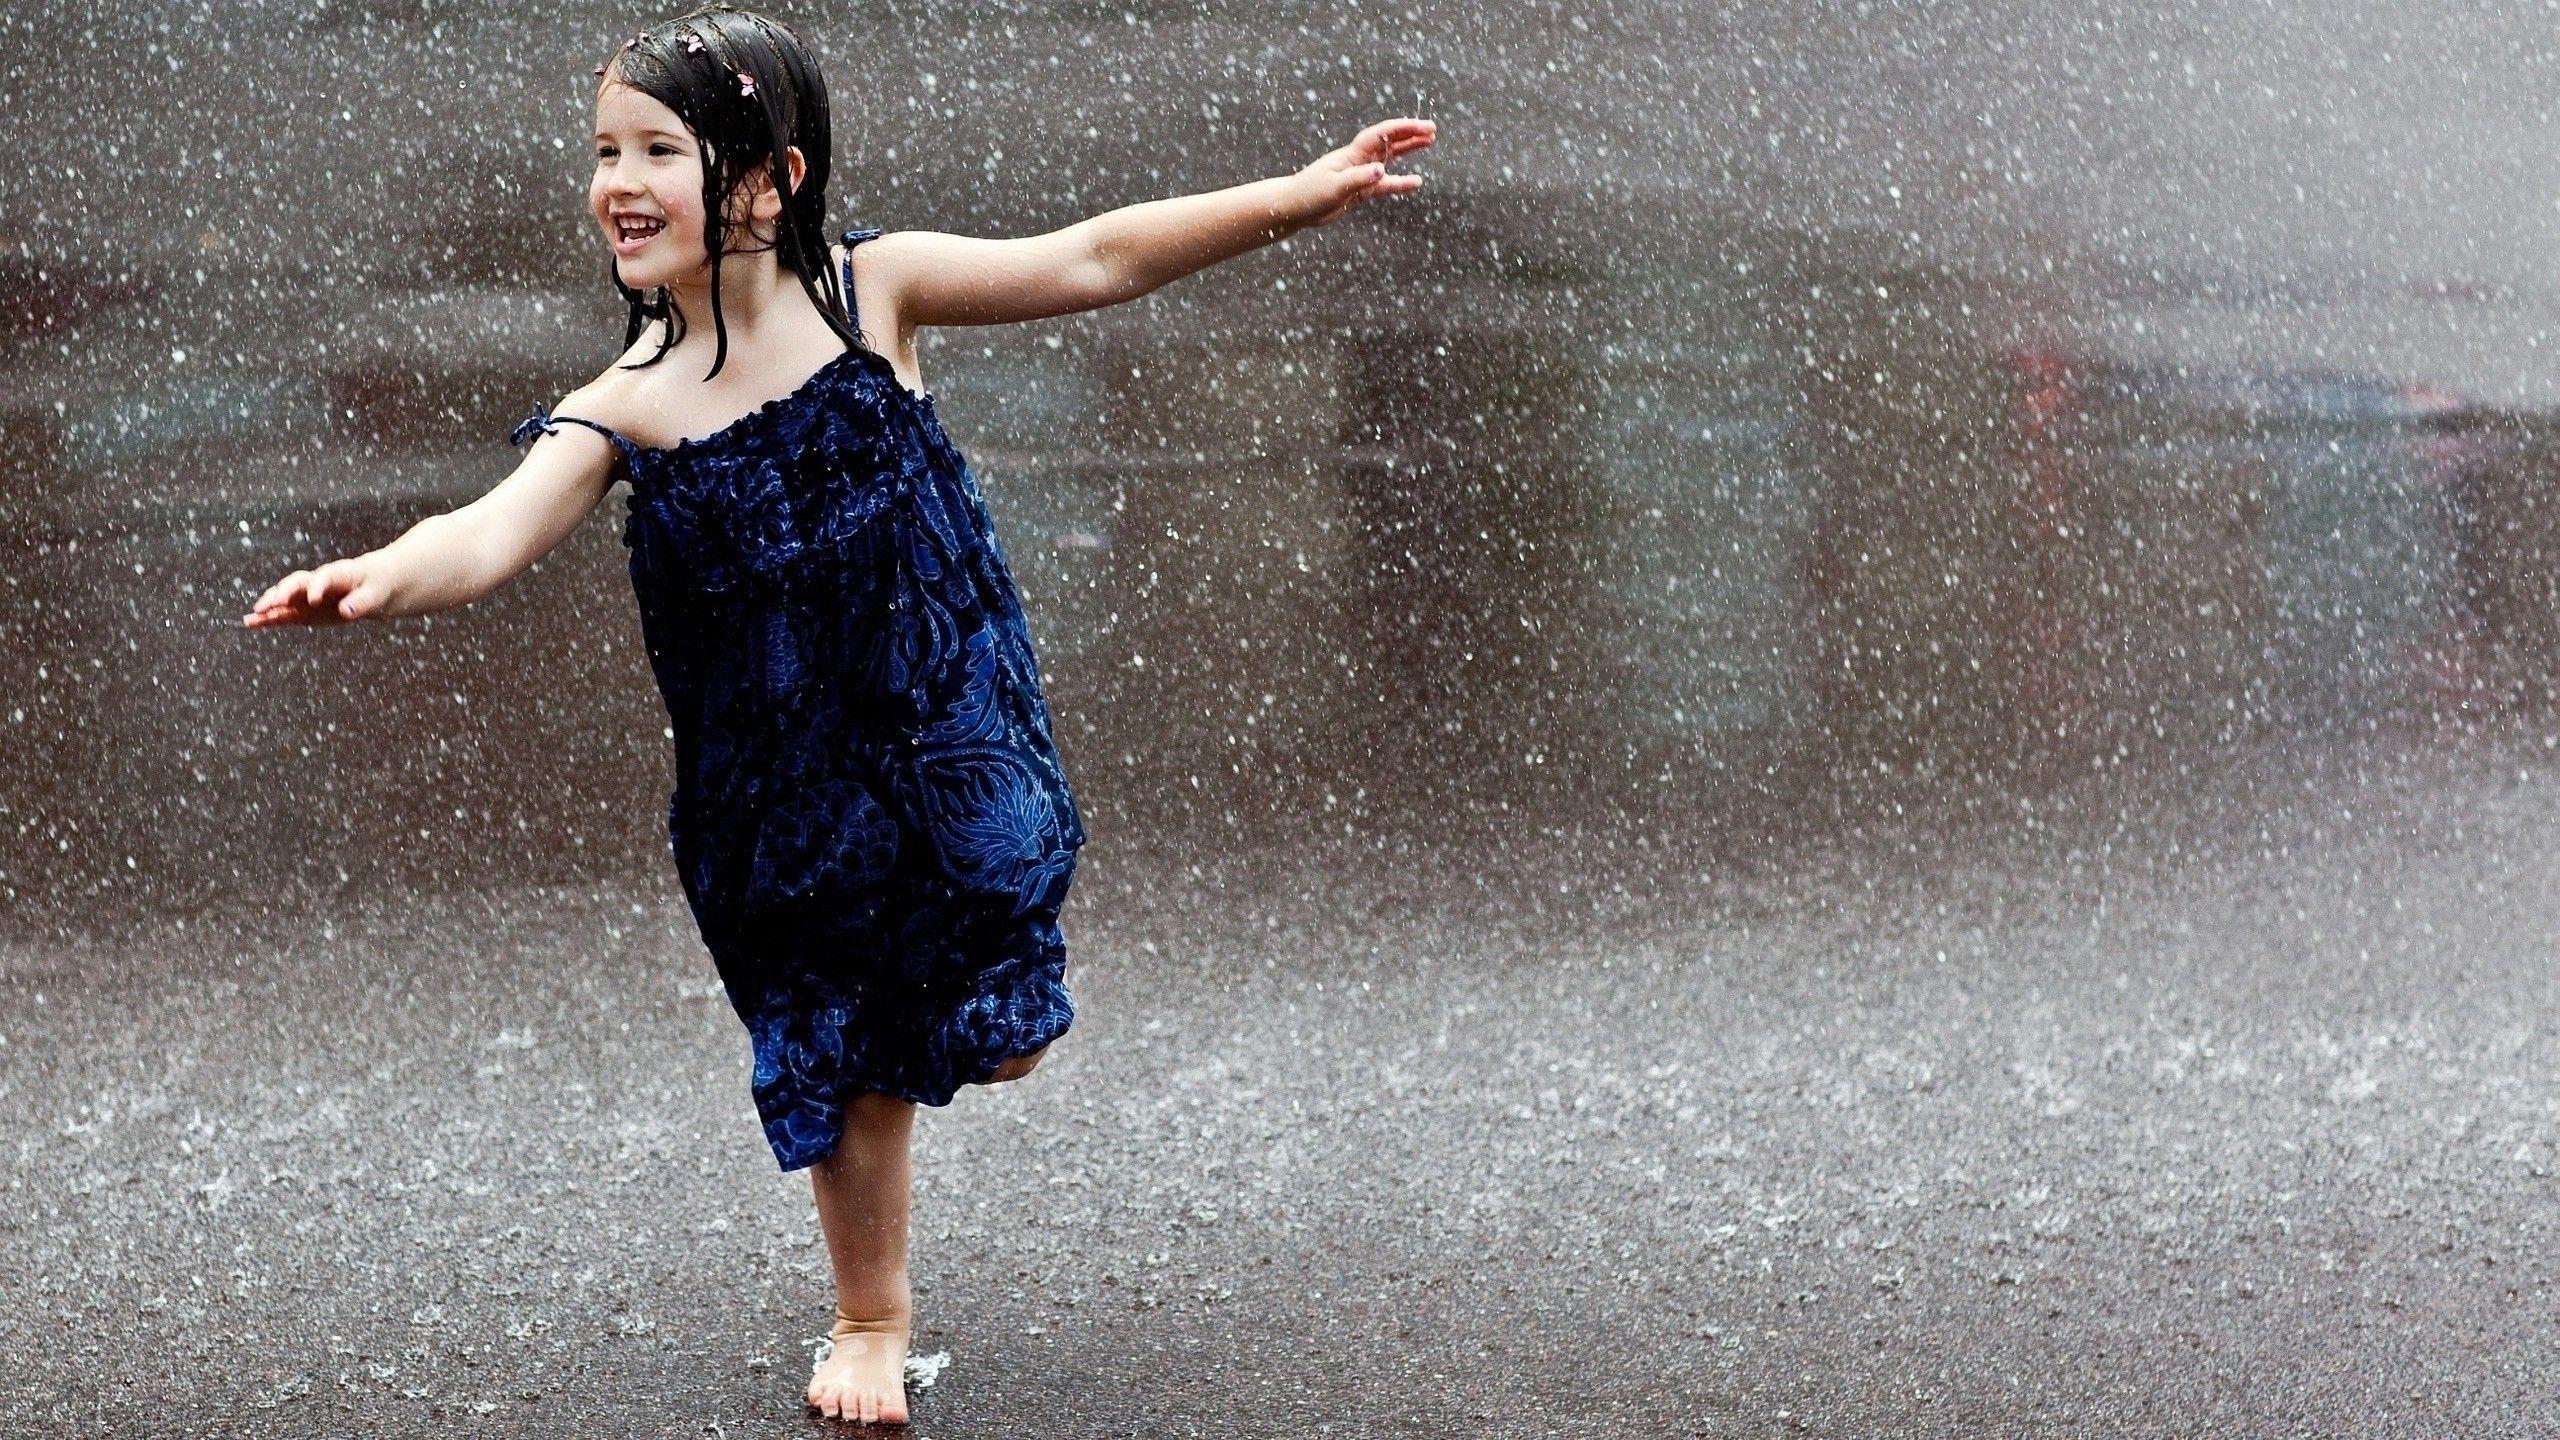 Happy child runs in the rain wallpapers and image.